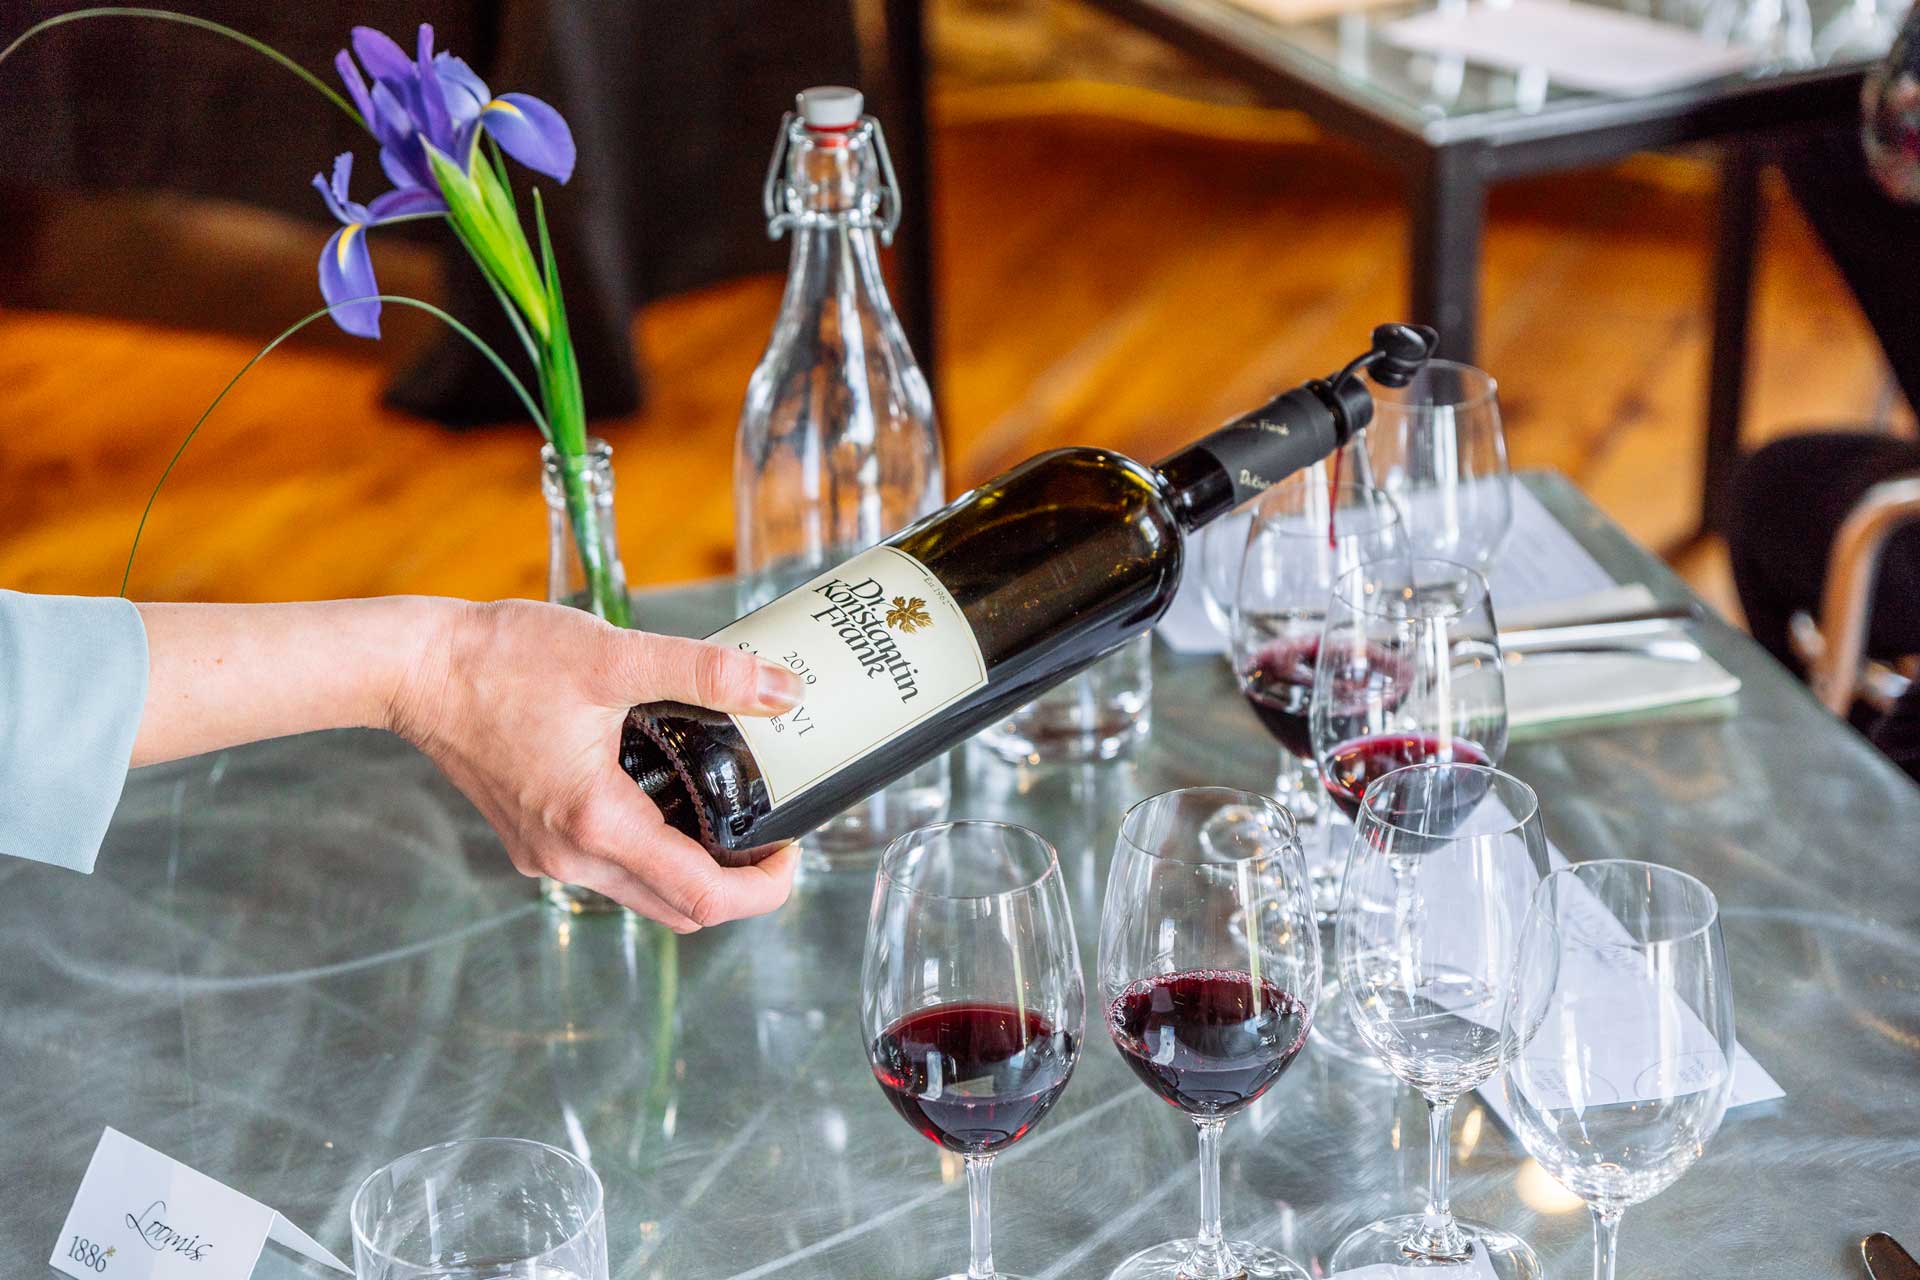 A bottle of red wine being poured into several glasses.